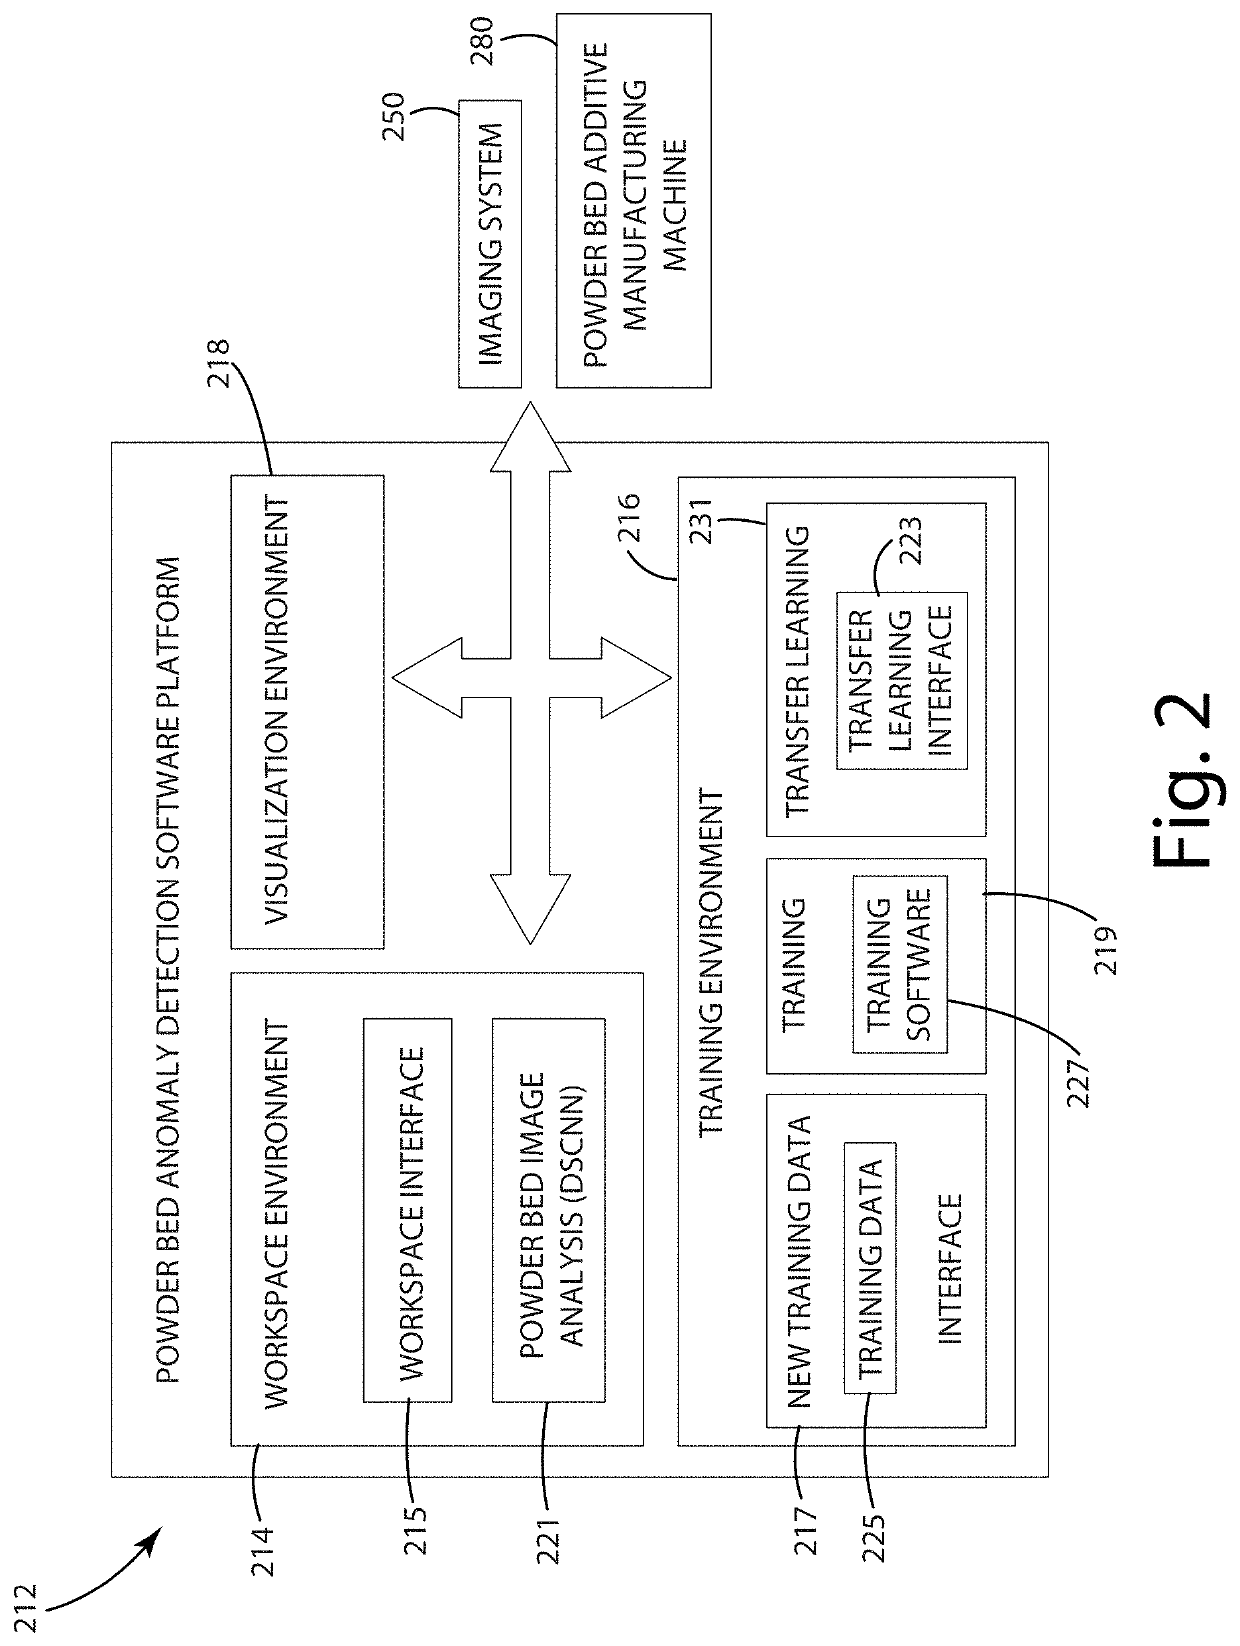 Systems and methods for powder bed additive manufacturing anomaly detection